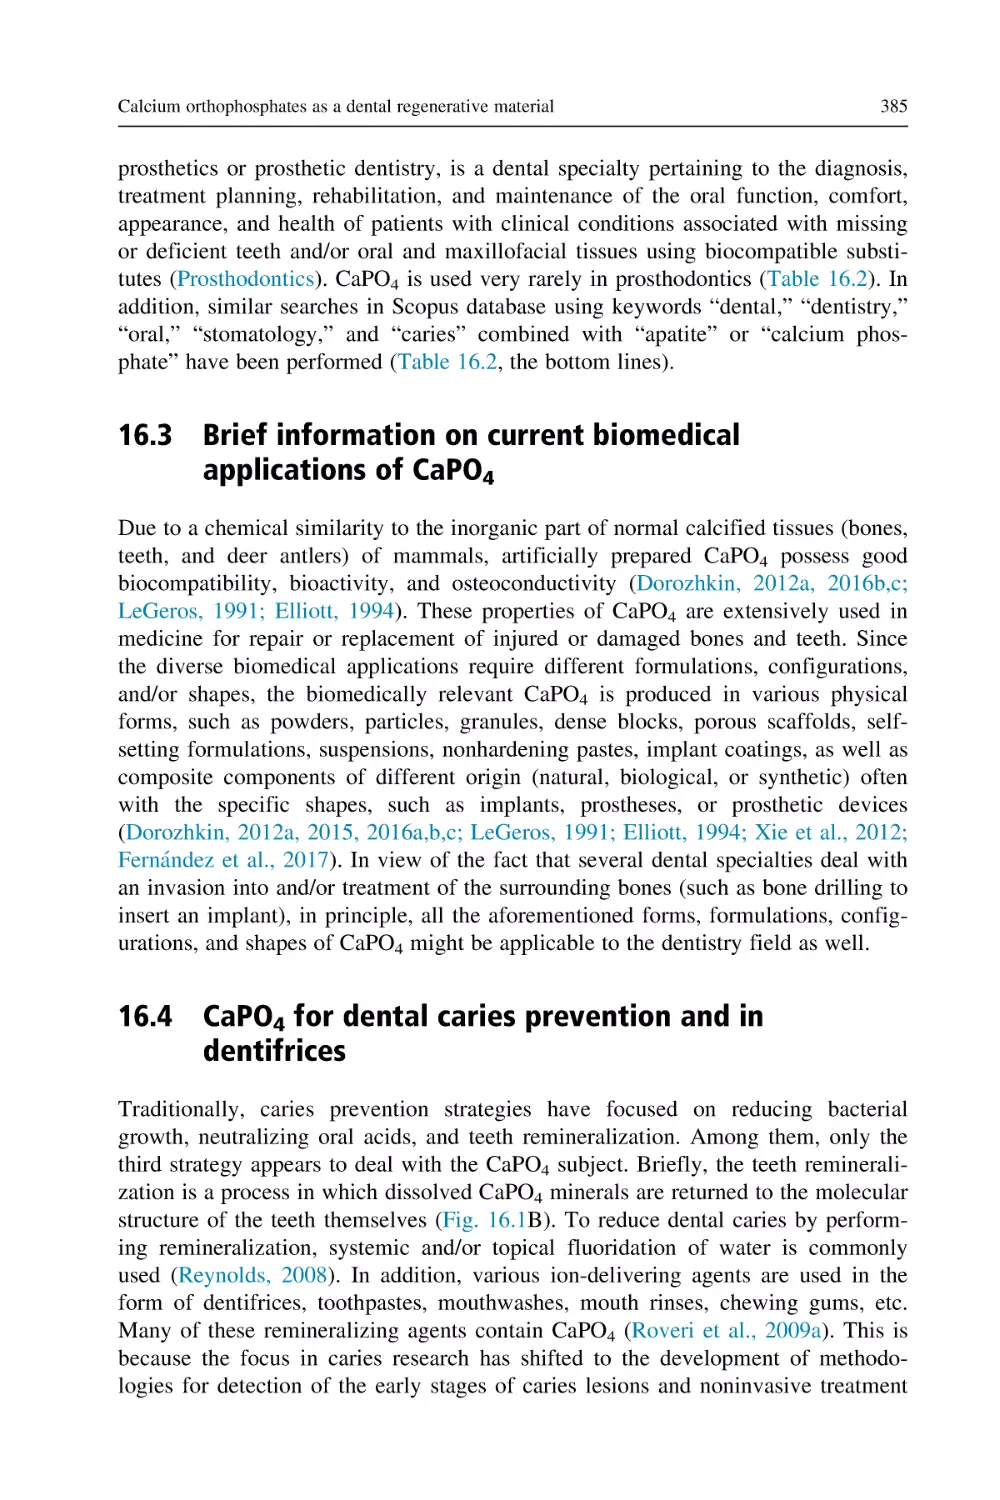 16.3 Brief information on current biomedical applications of CaPO4
16.4 CaPO4 for dental caries prevention and in dentifrices